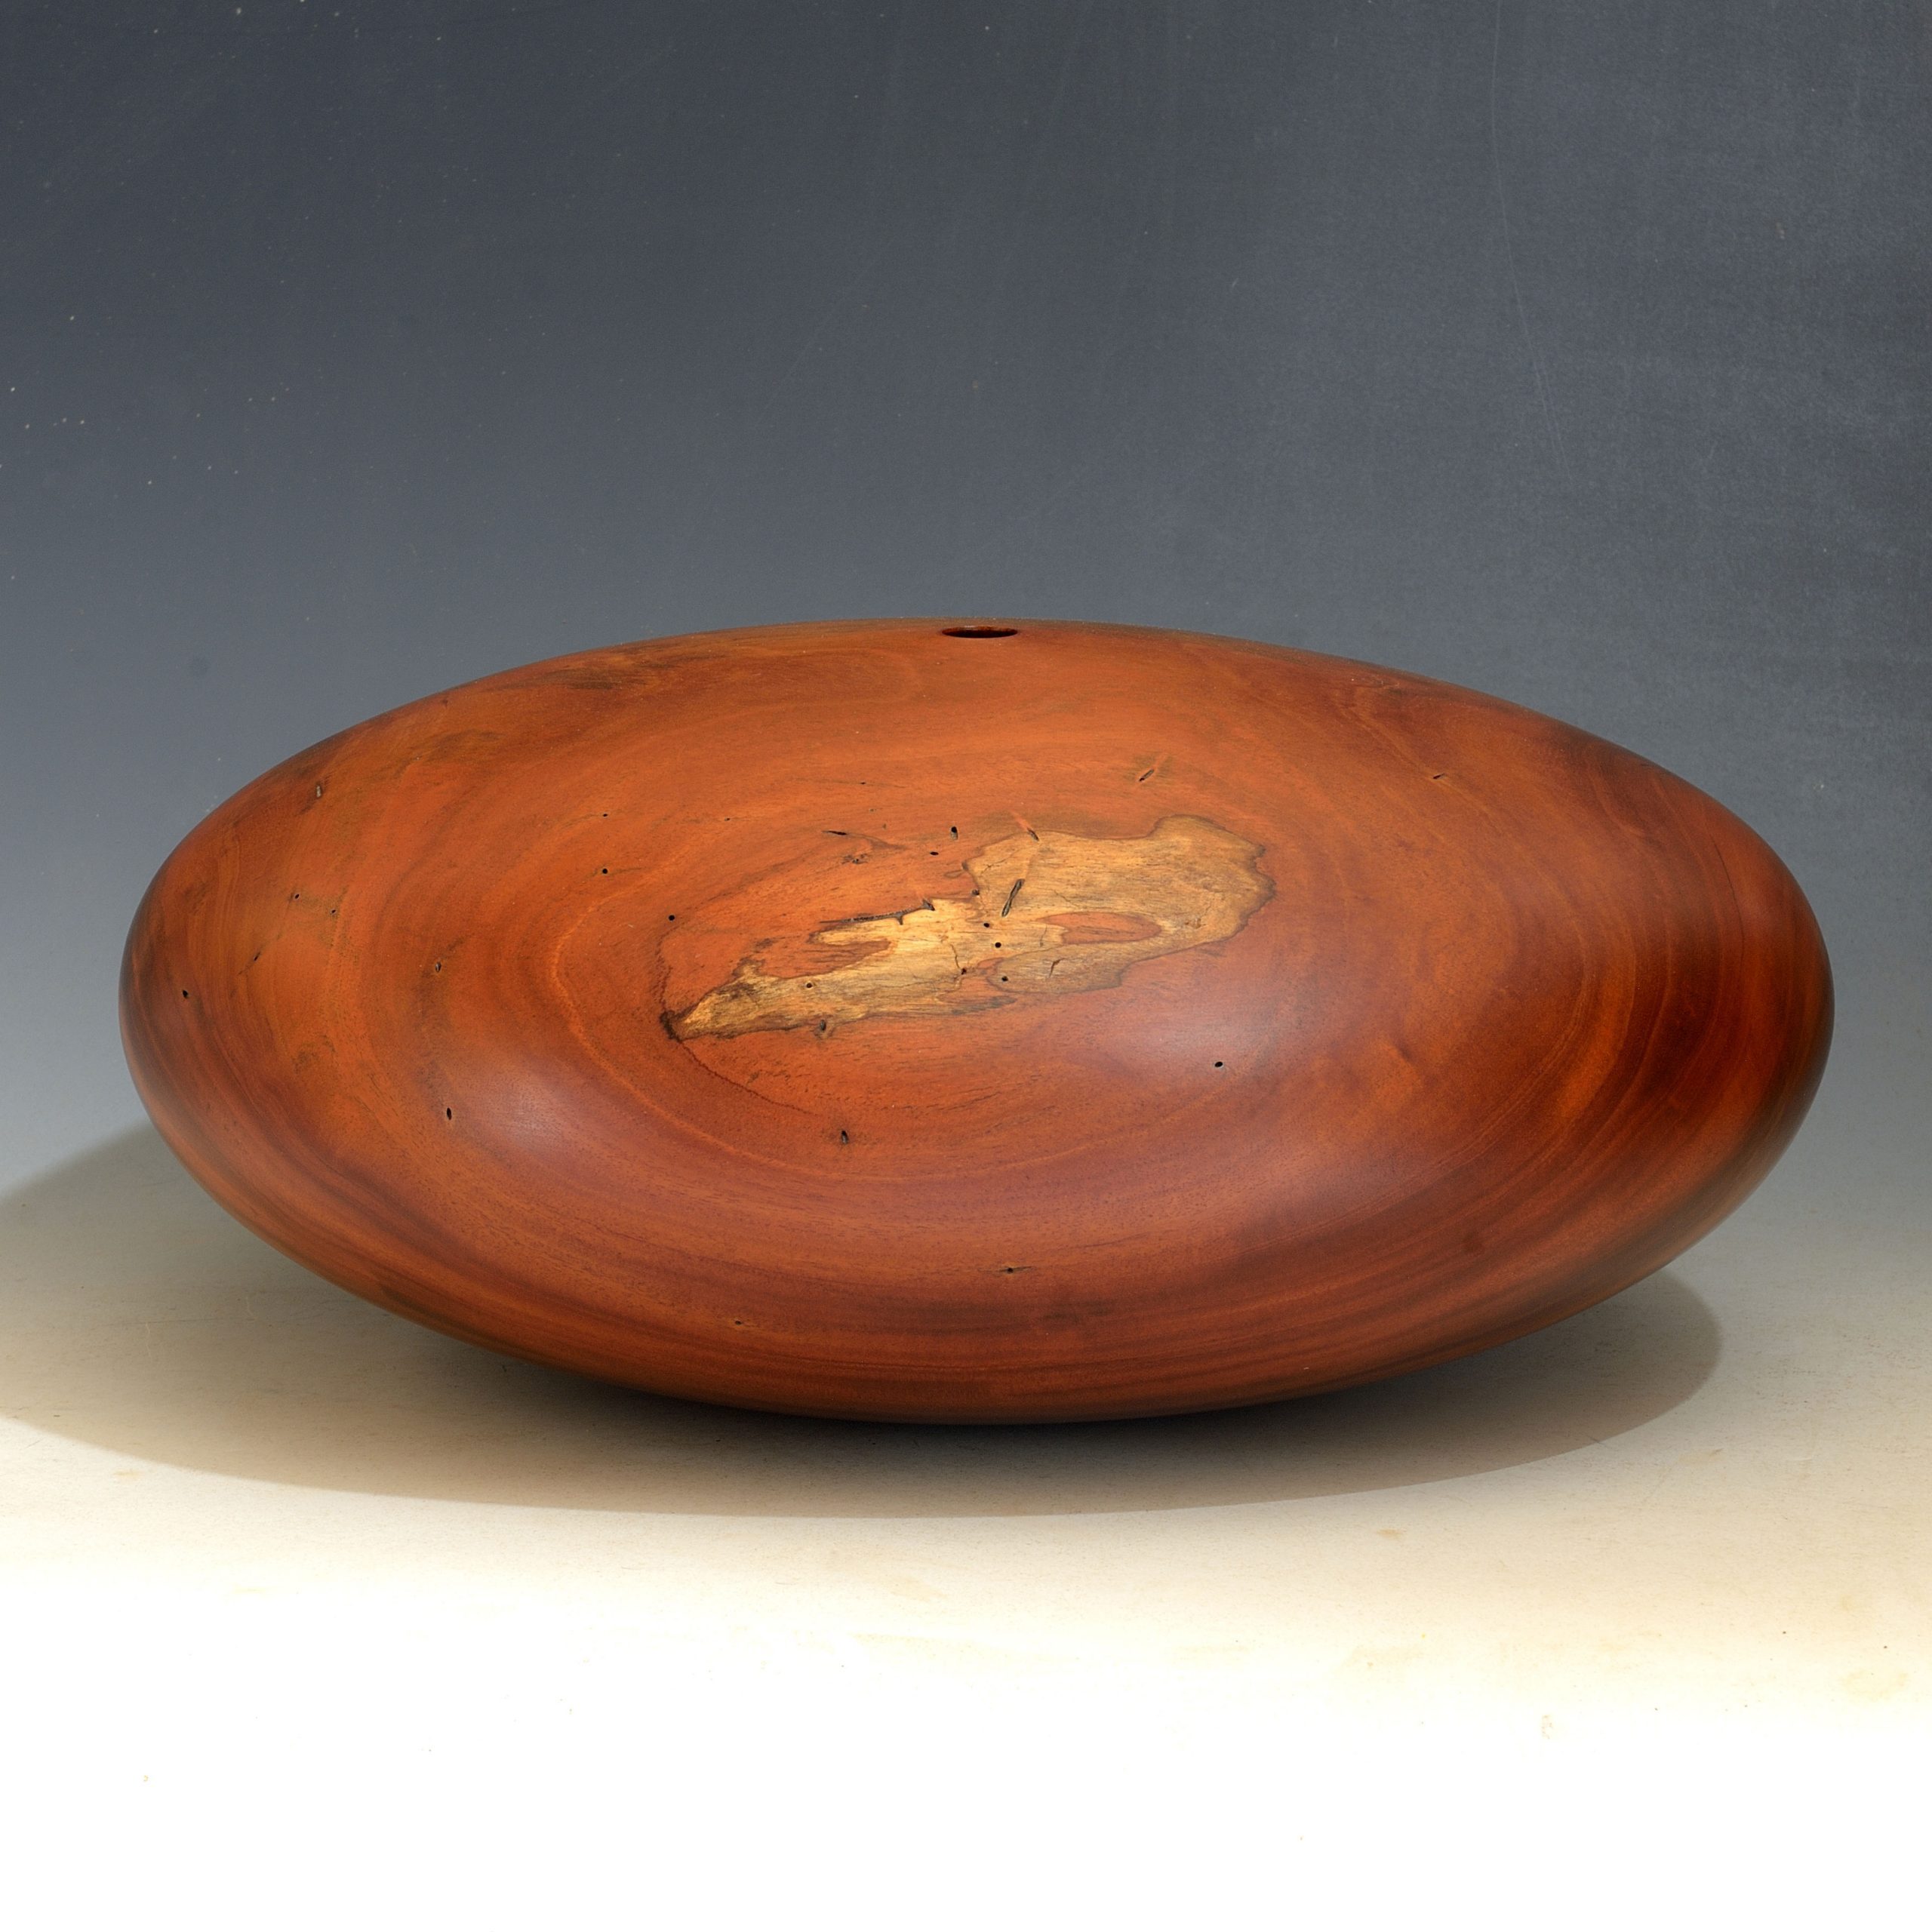 Gordon Browning, Red Desert, 2010, Cuban Mahogany, 6.75x16x16 inches, collection of the artist